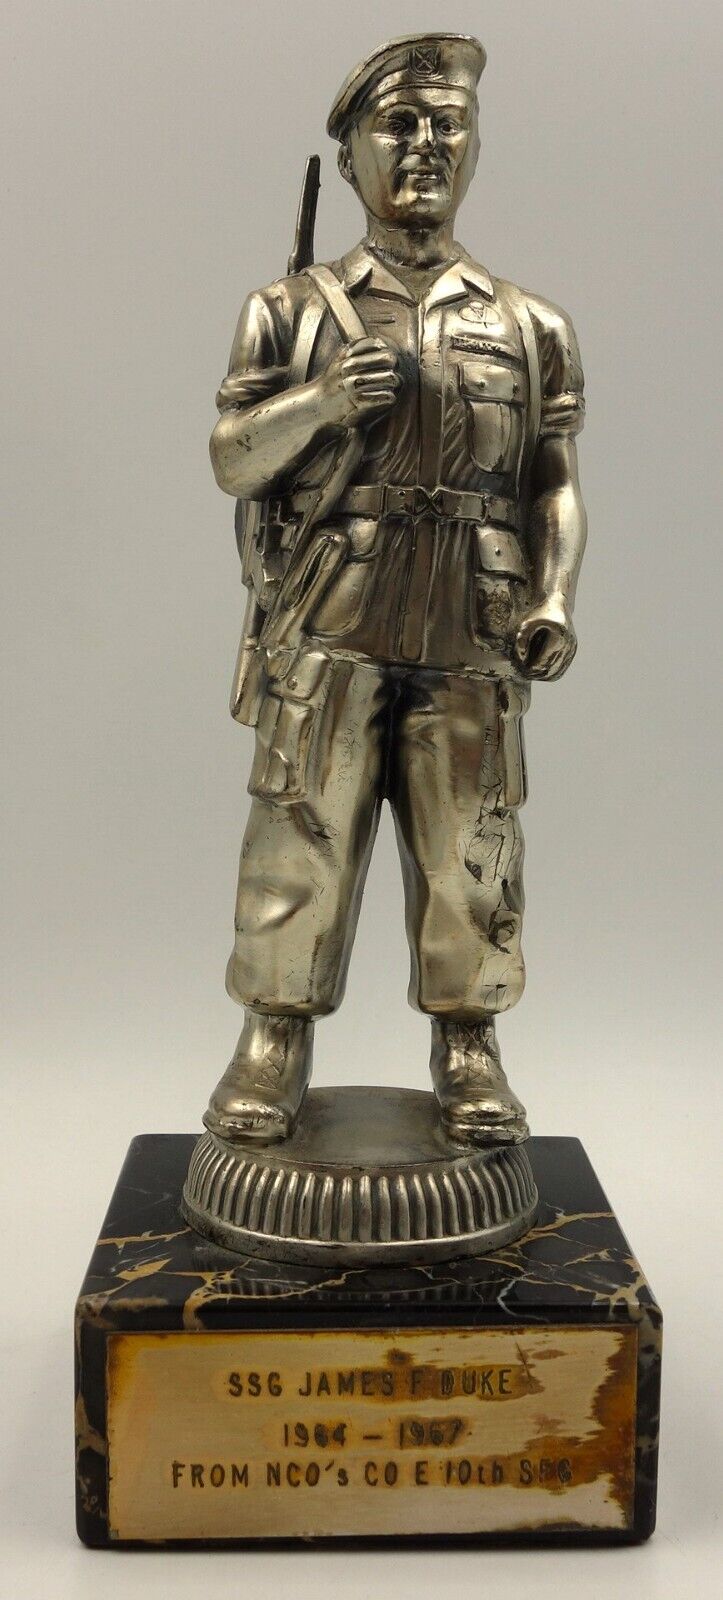 SF25, Named Special Forces Minty Mike Statue, 1964-1967